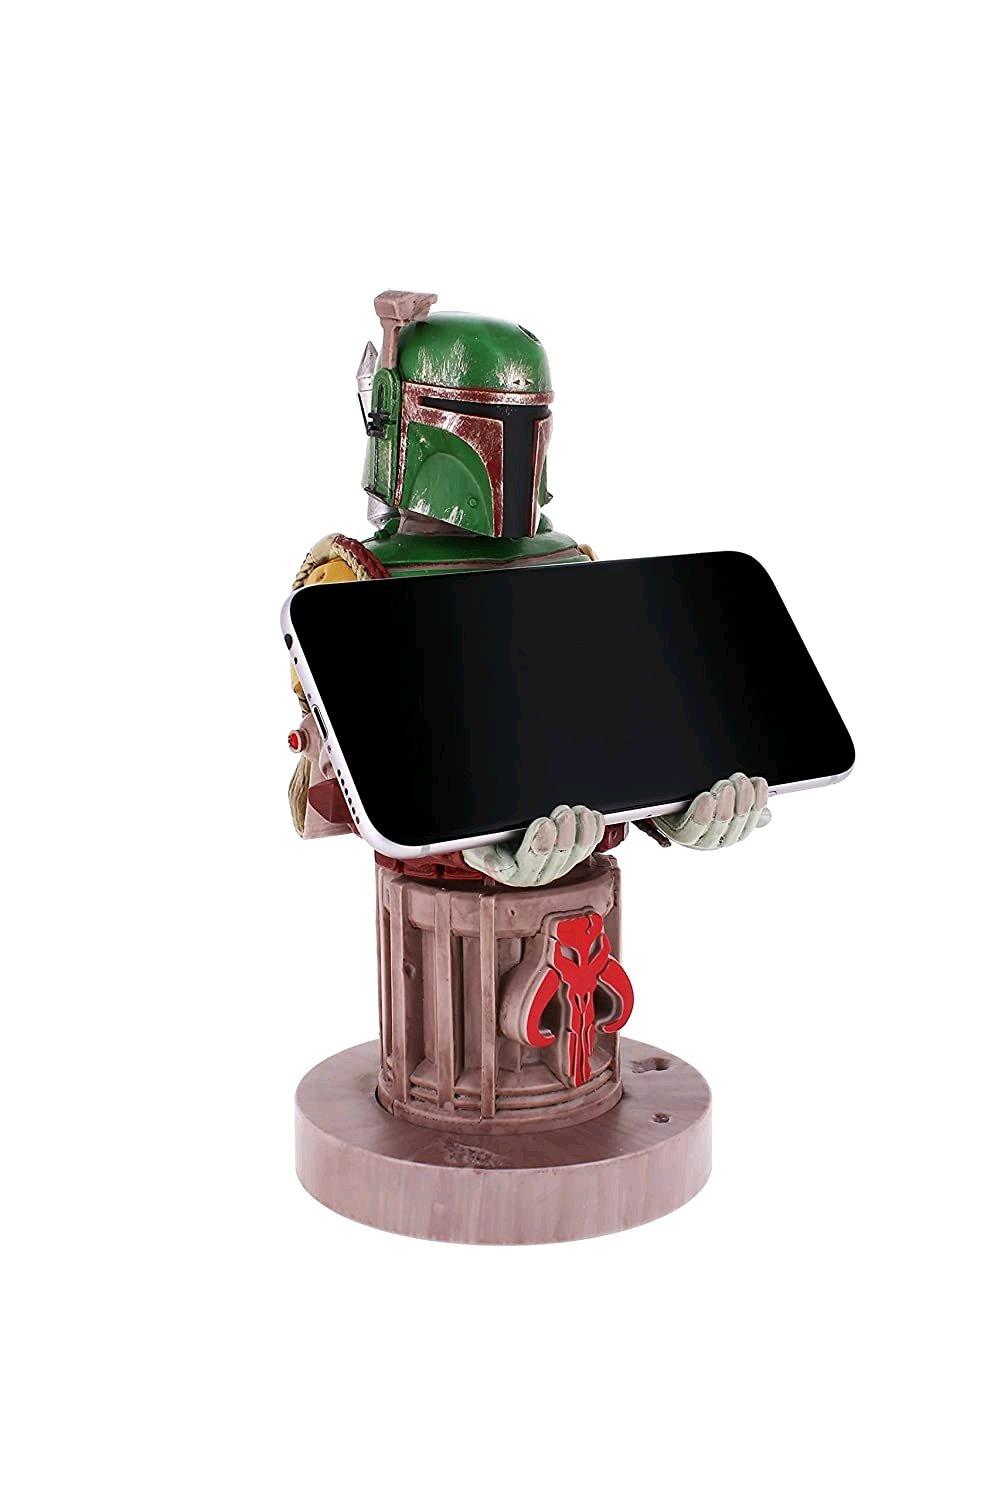 EXQUISITE GAMING  Star Wars Boba Fett - Cable Guy 